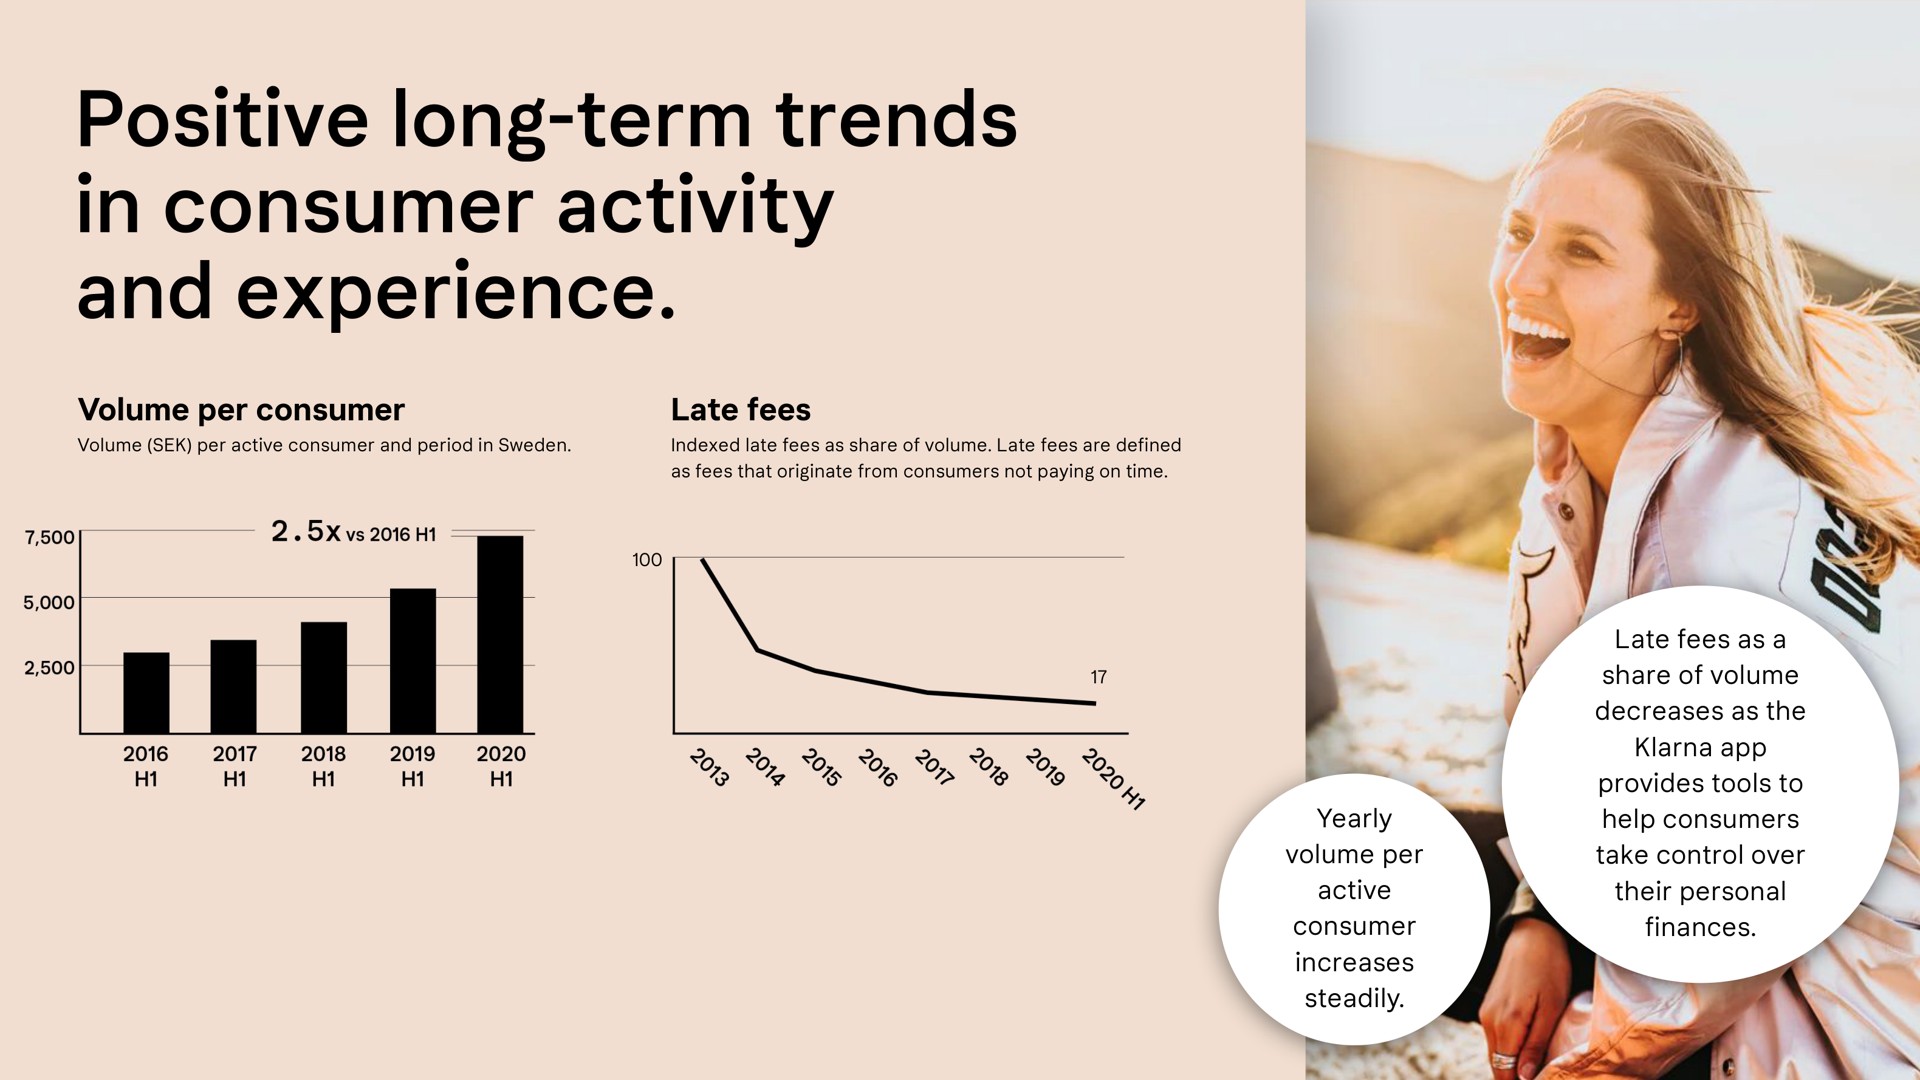 volume per consumer late fees late fees as a share of volume decreases as the provides tools to help consumers take control over their personal finances yearly volume per active consumer increases steadily positive long term trends in activity and experience | Klarna